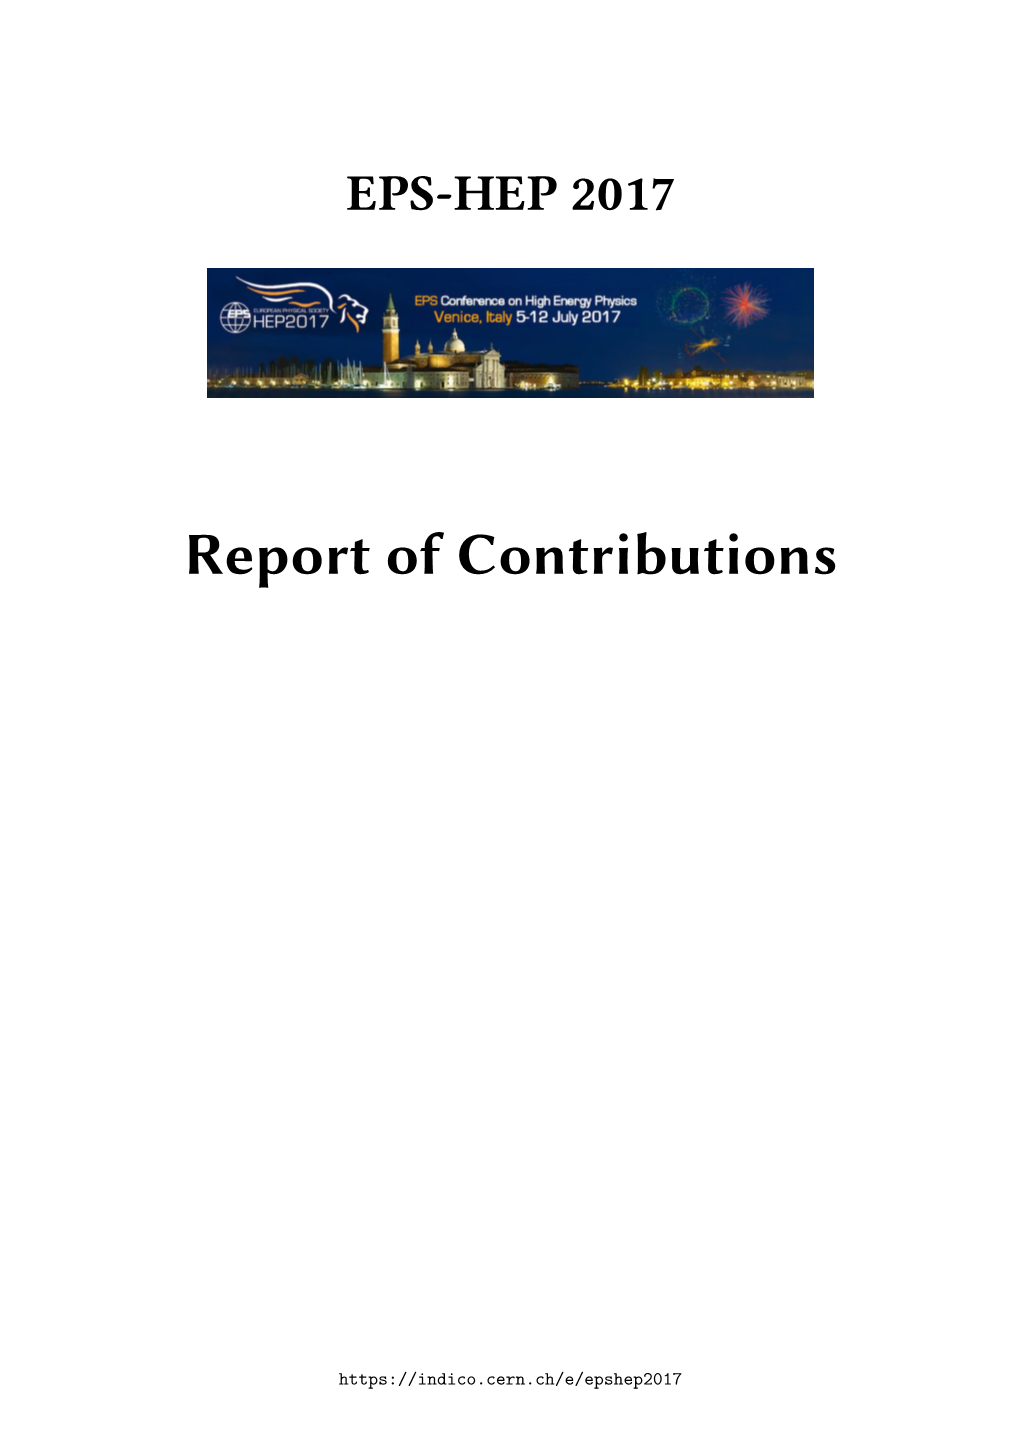 EPS-HEP 2017 Report of Contributions